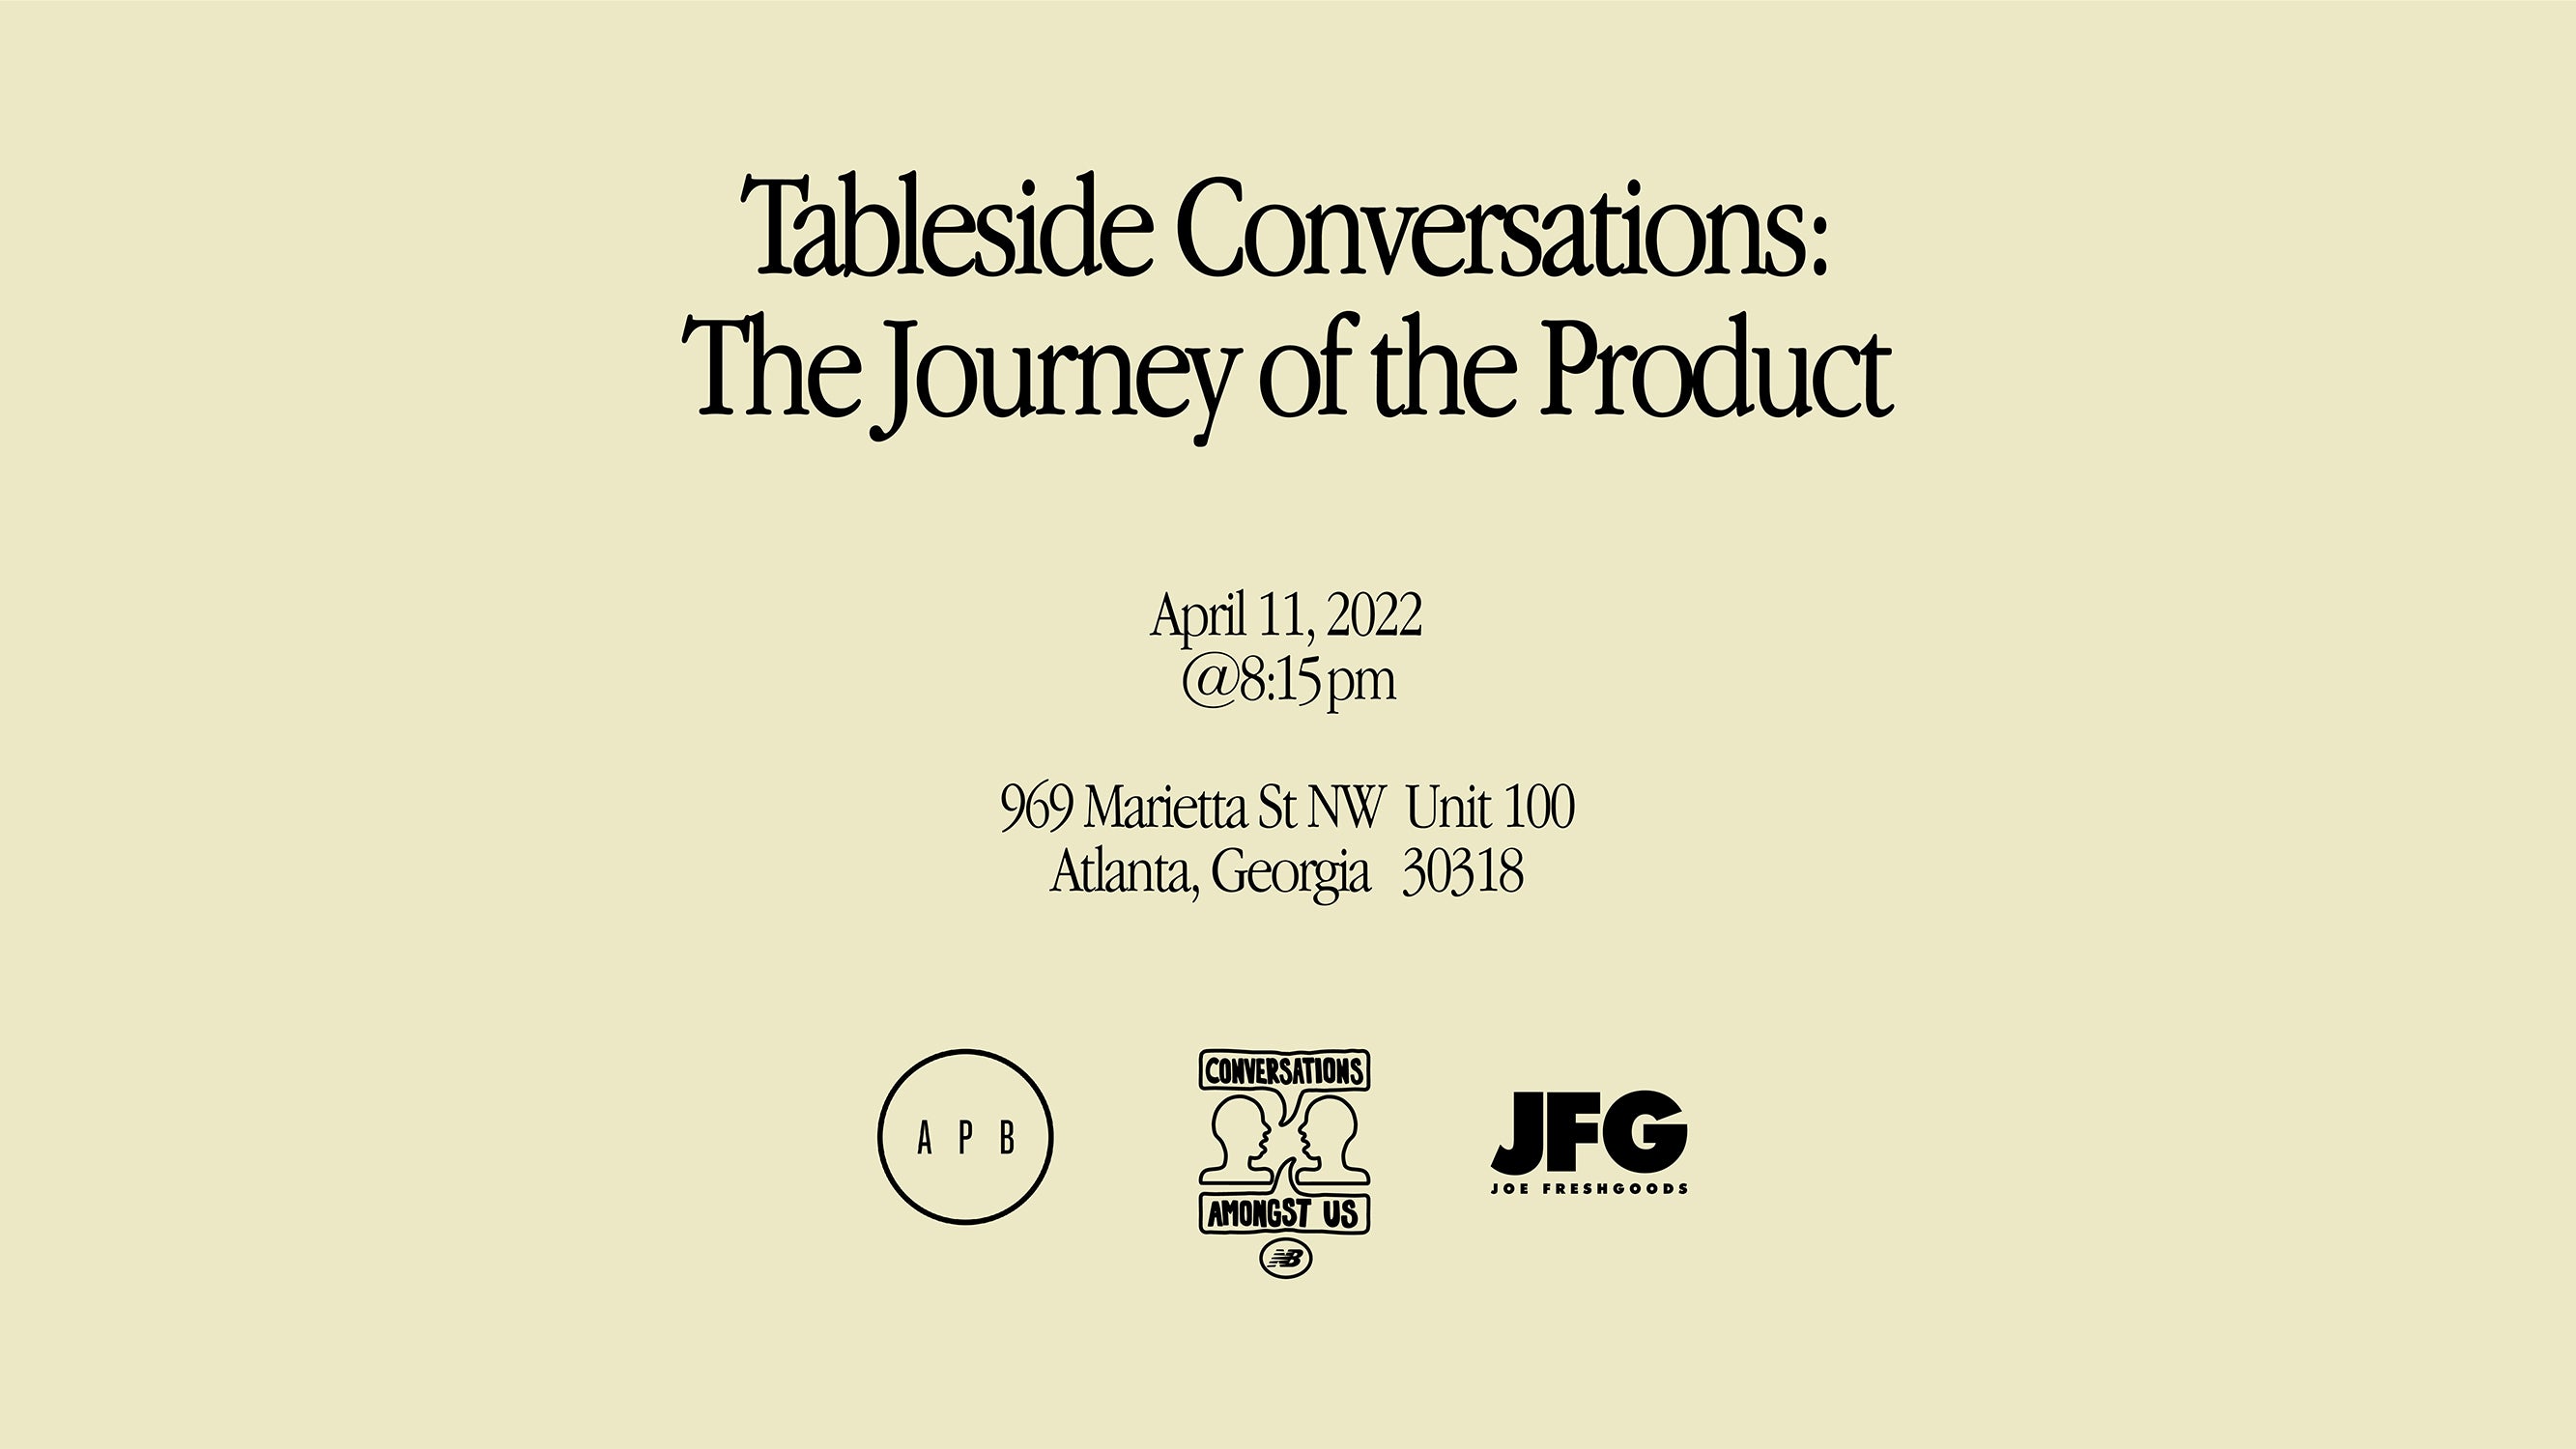 Join us for Tableside Conversations: The Journey of the Product with Joe Fresh Goods